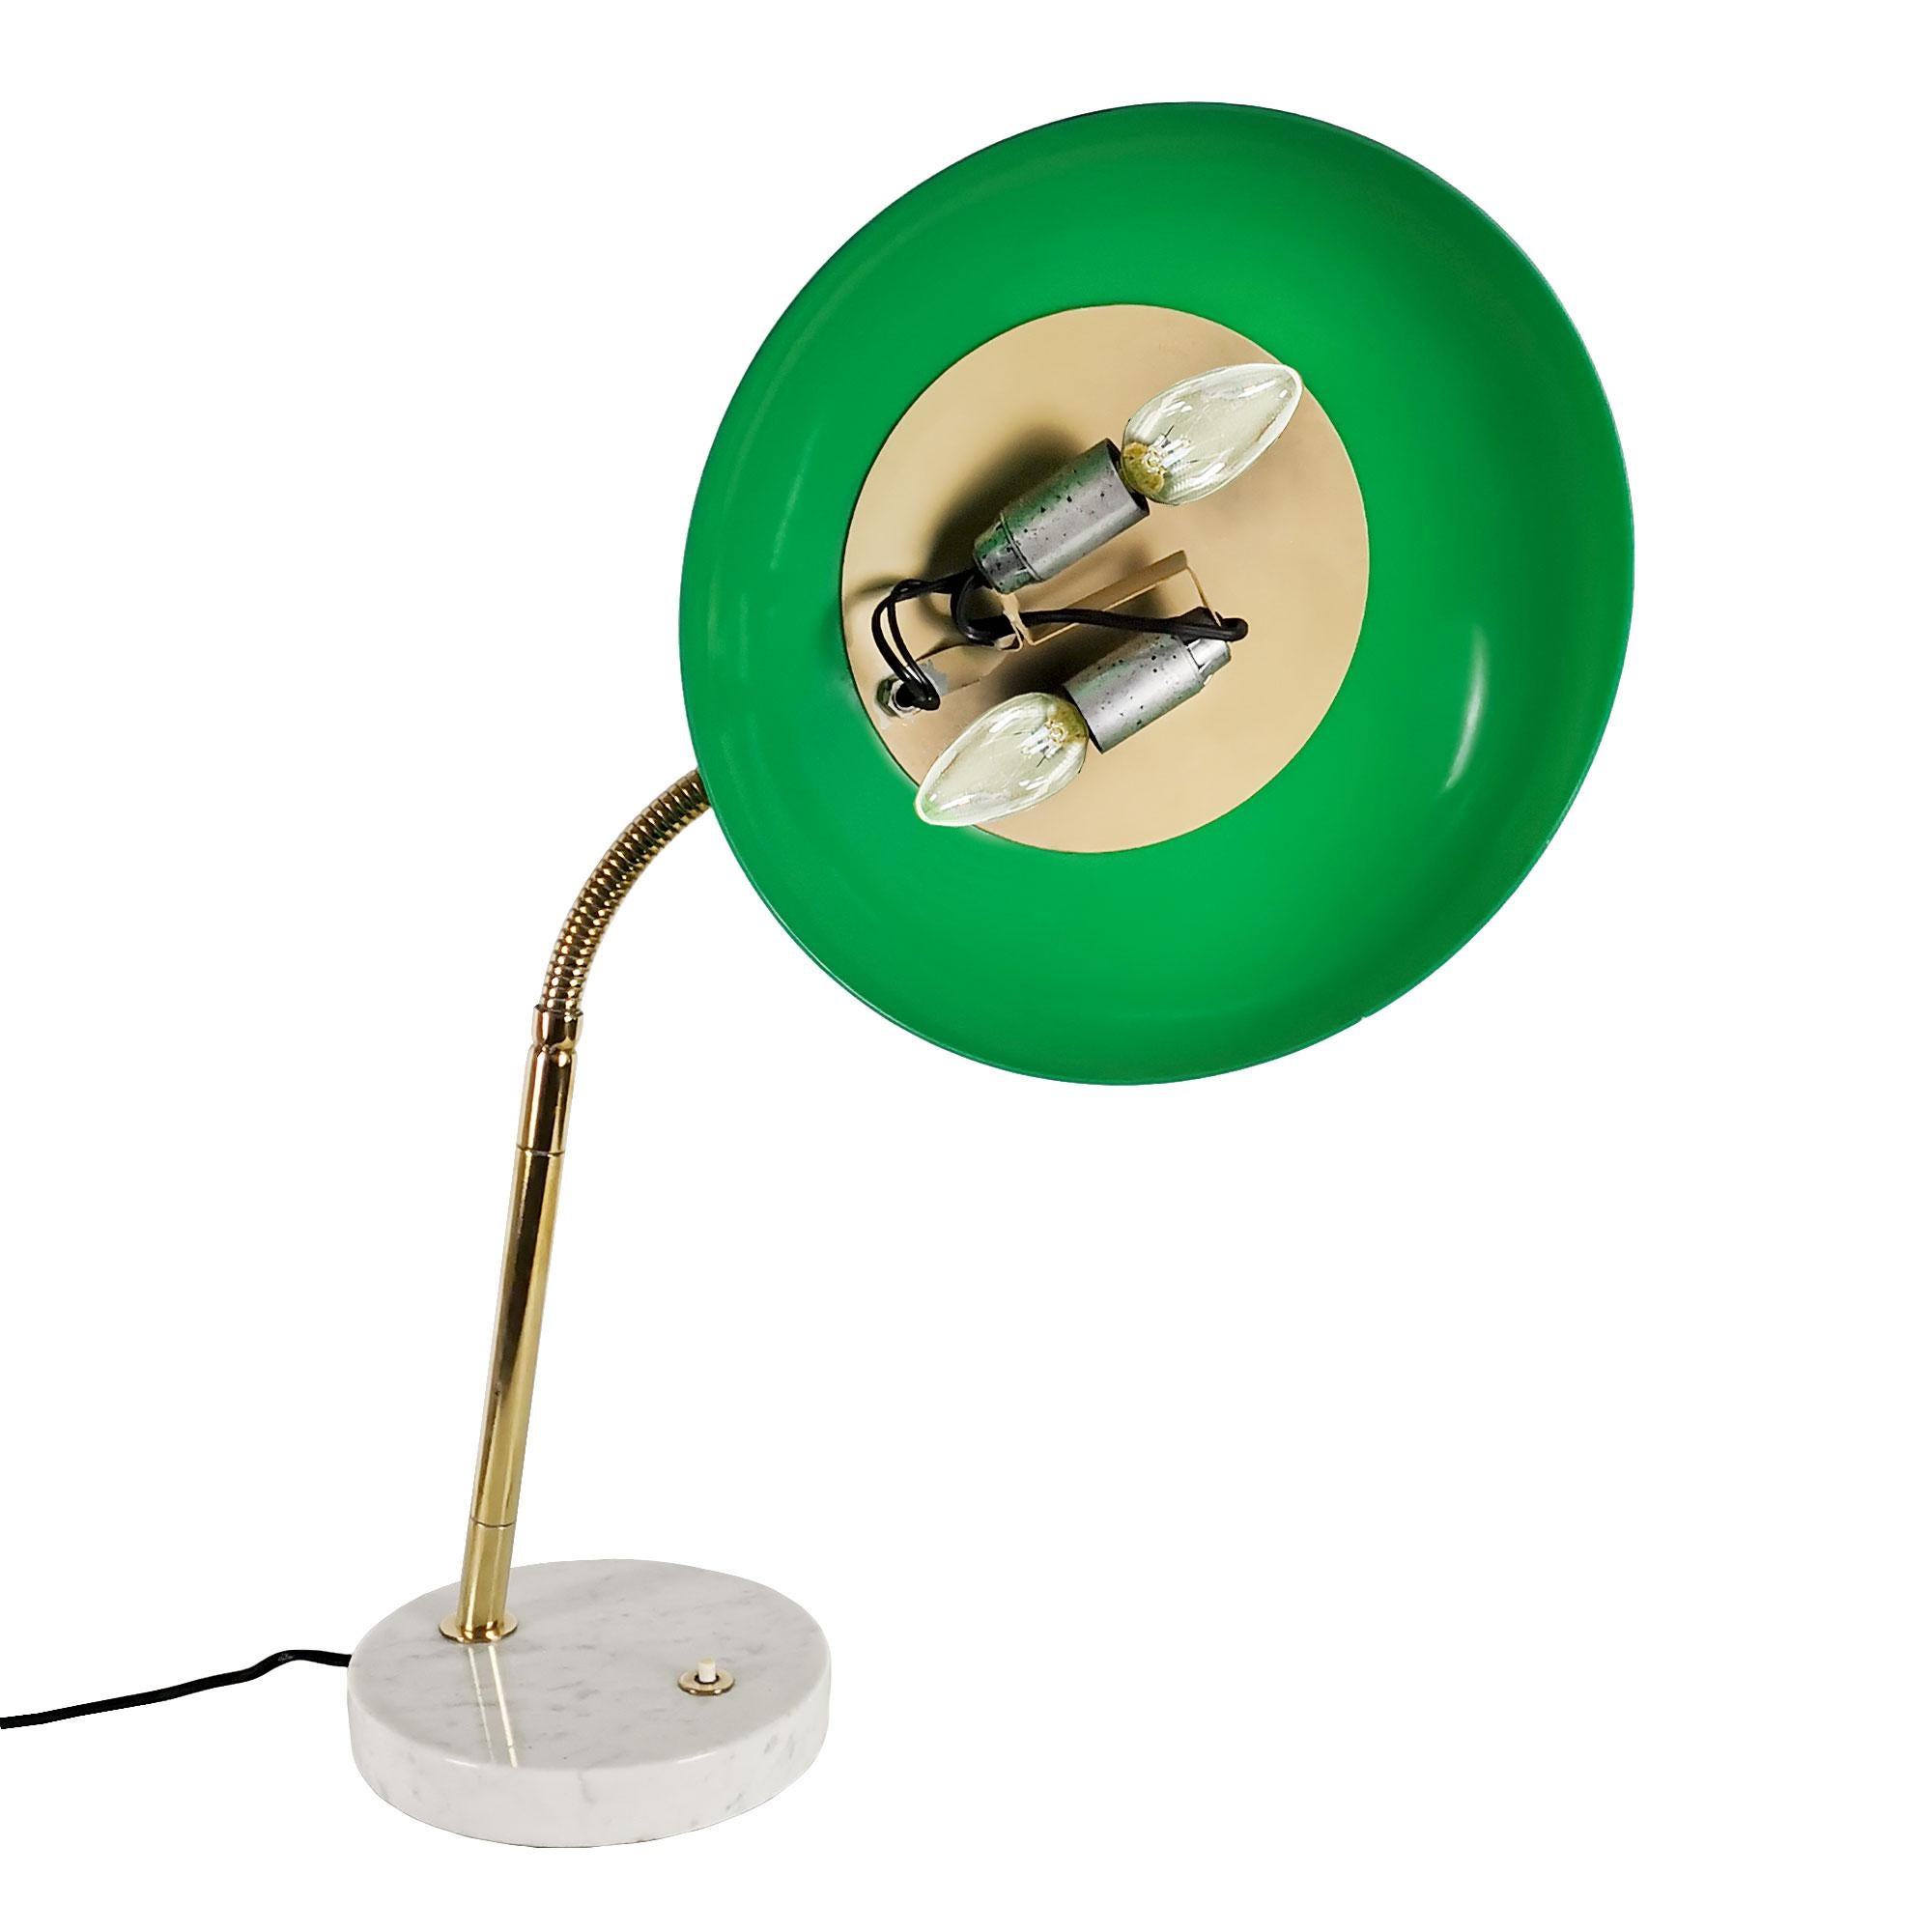 Mid-Century Modern Desk Lamp Attributed Stilnovo, Marble, Brass, Plastic - Italy In Good Condition For Sale In Girona, ES